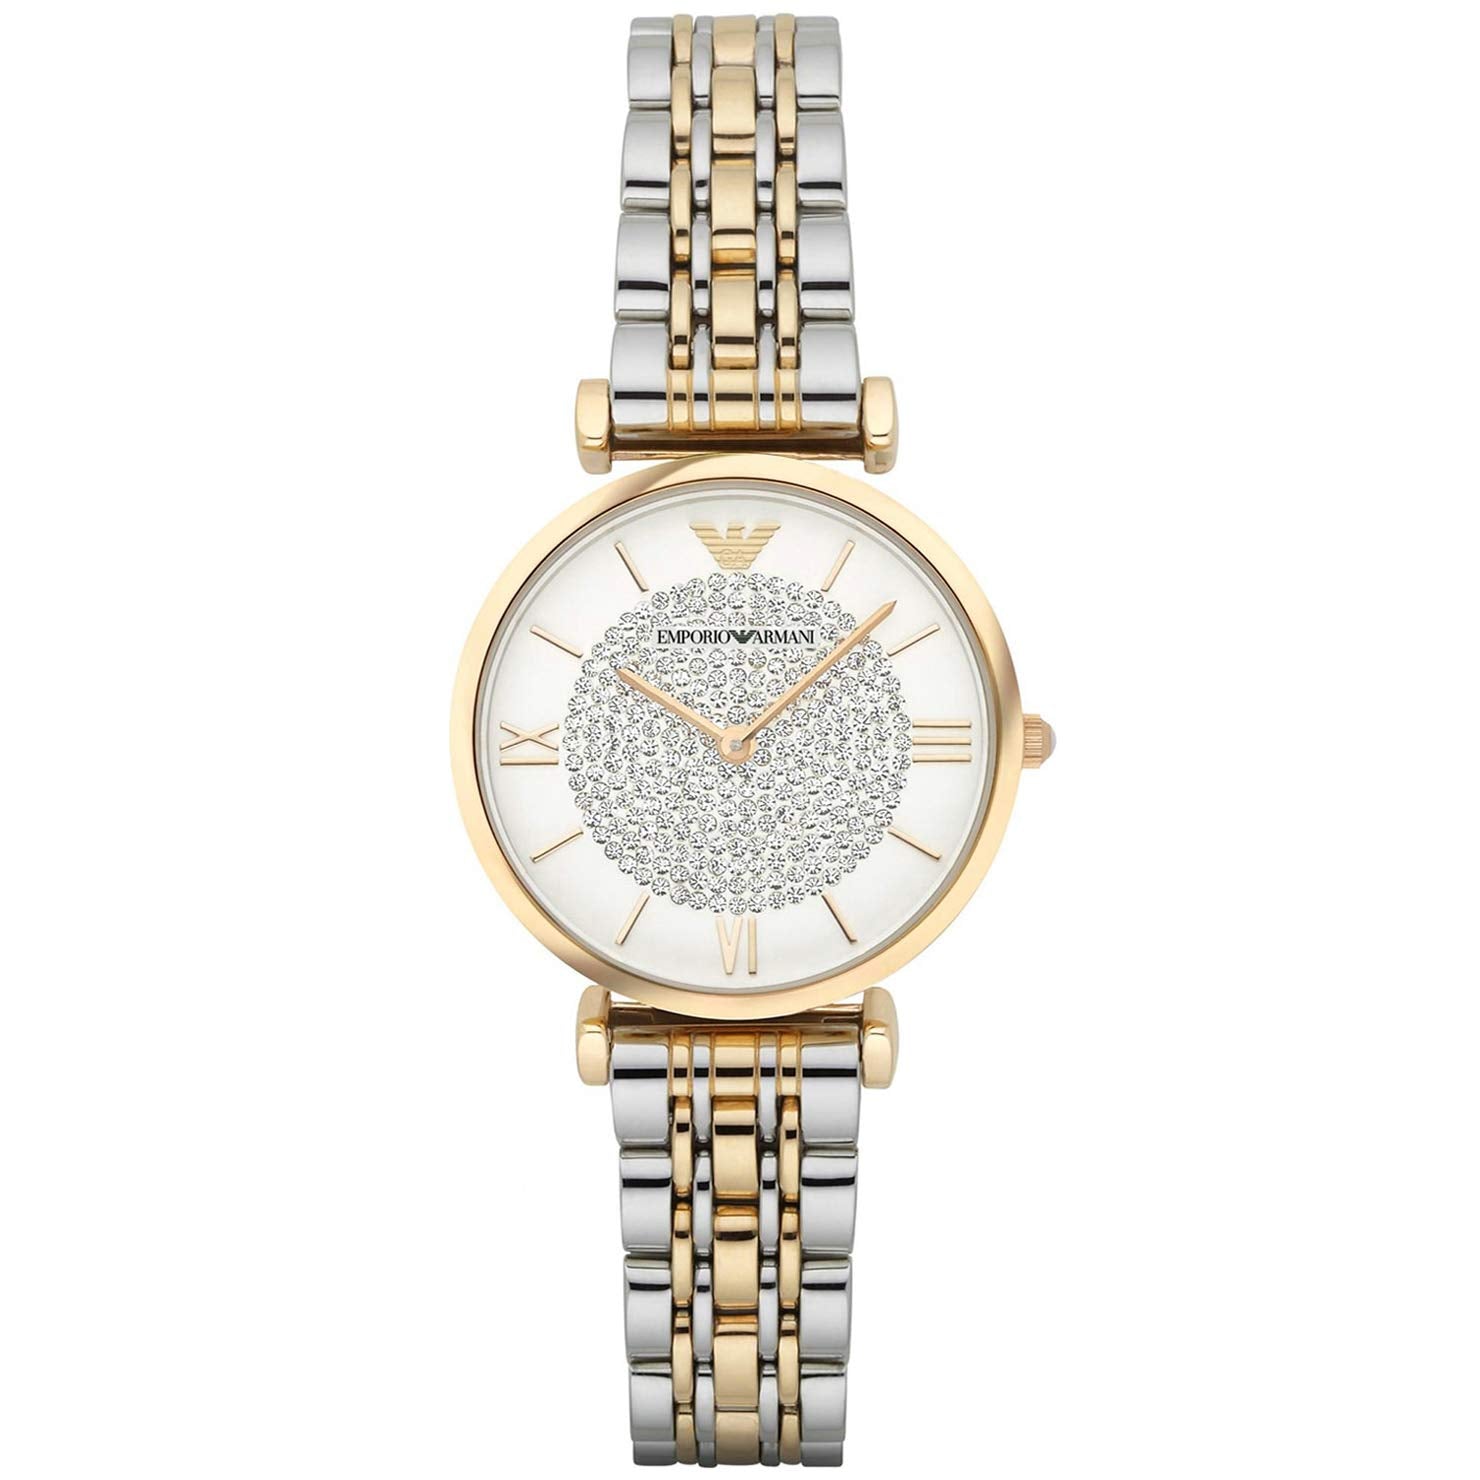 Emporio Armani AR8031 Women’s Analog Two Tone Stainless Steel White Dial 32mm Watch